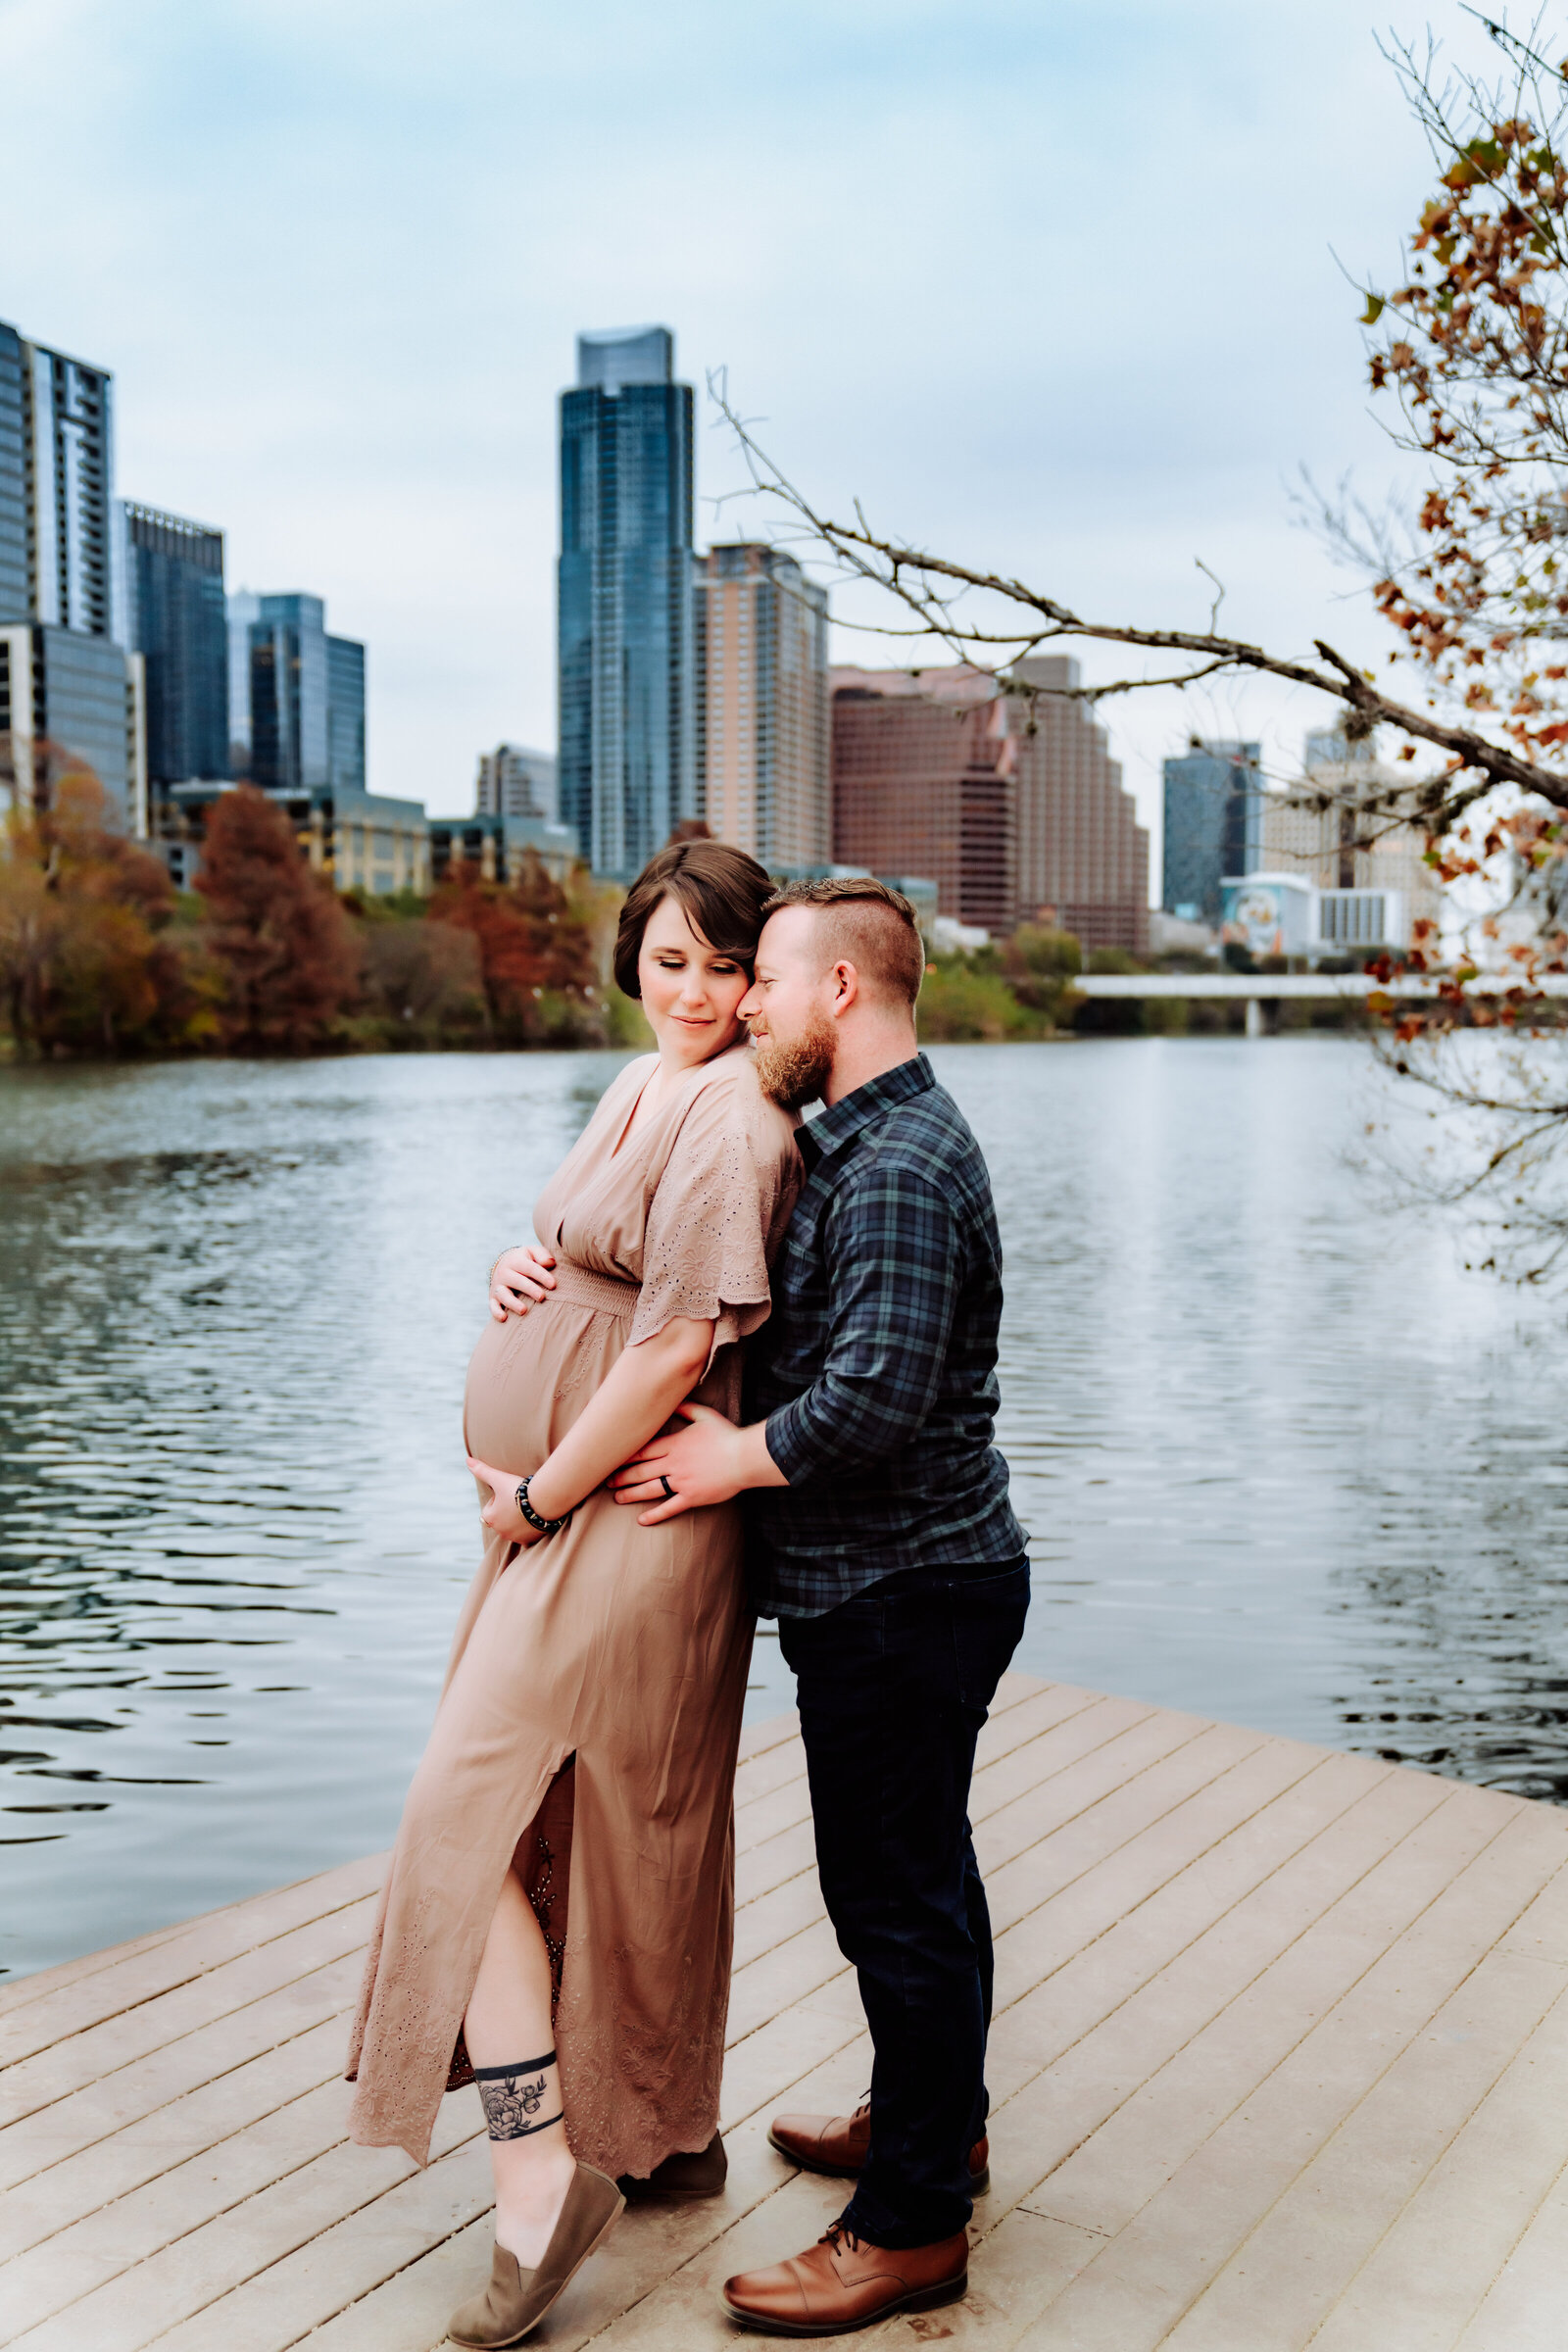 Maternity Photographer, a husband embraces his wife near the river in the city